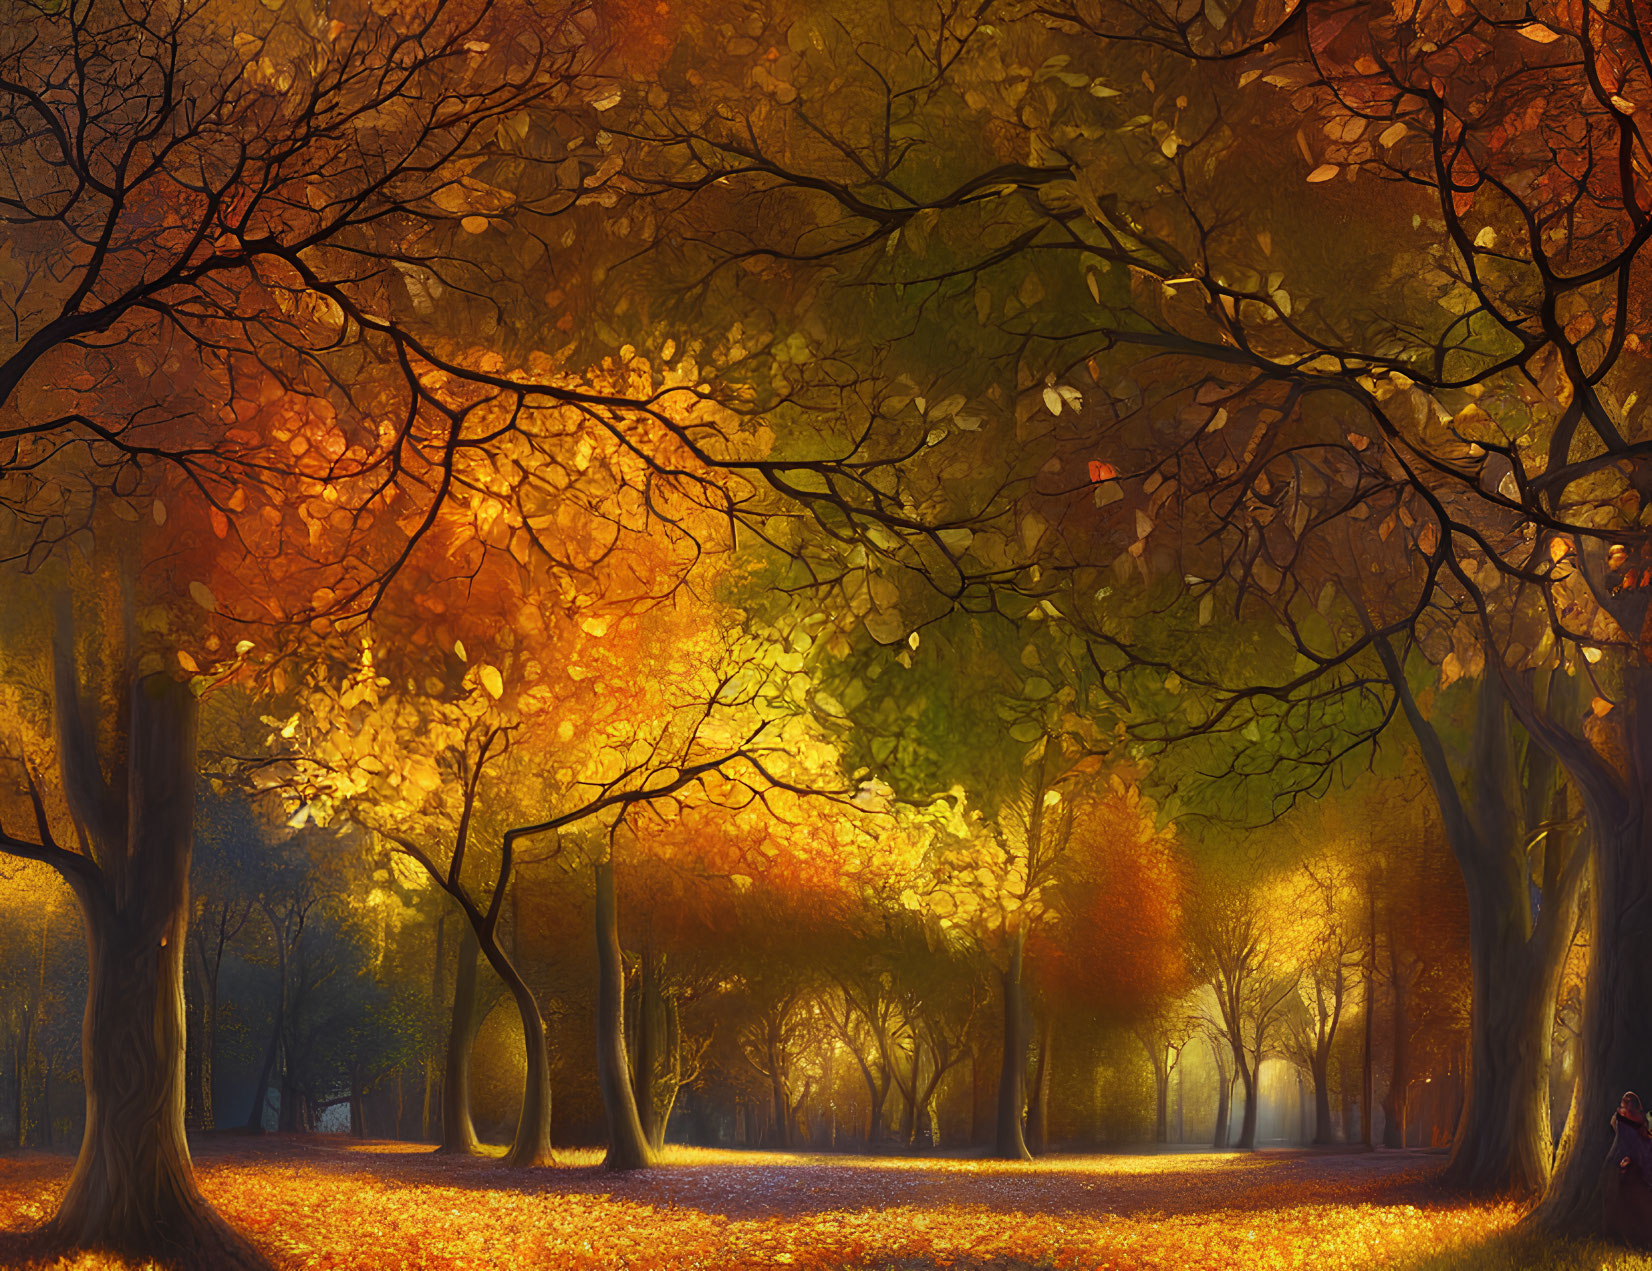 Vibrant autumn scene with orange and yellow leaves, fallen carpet, and sunbeams.